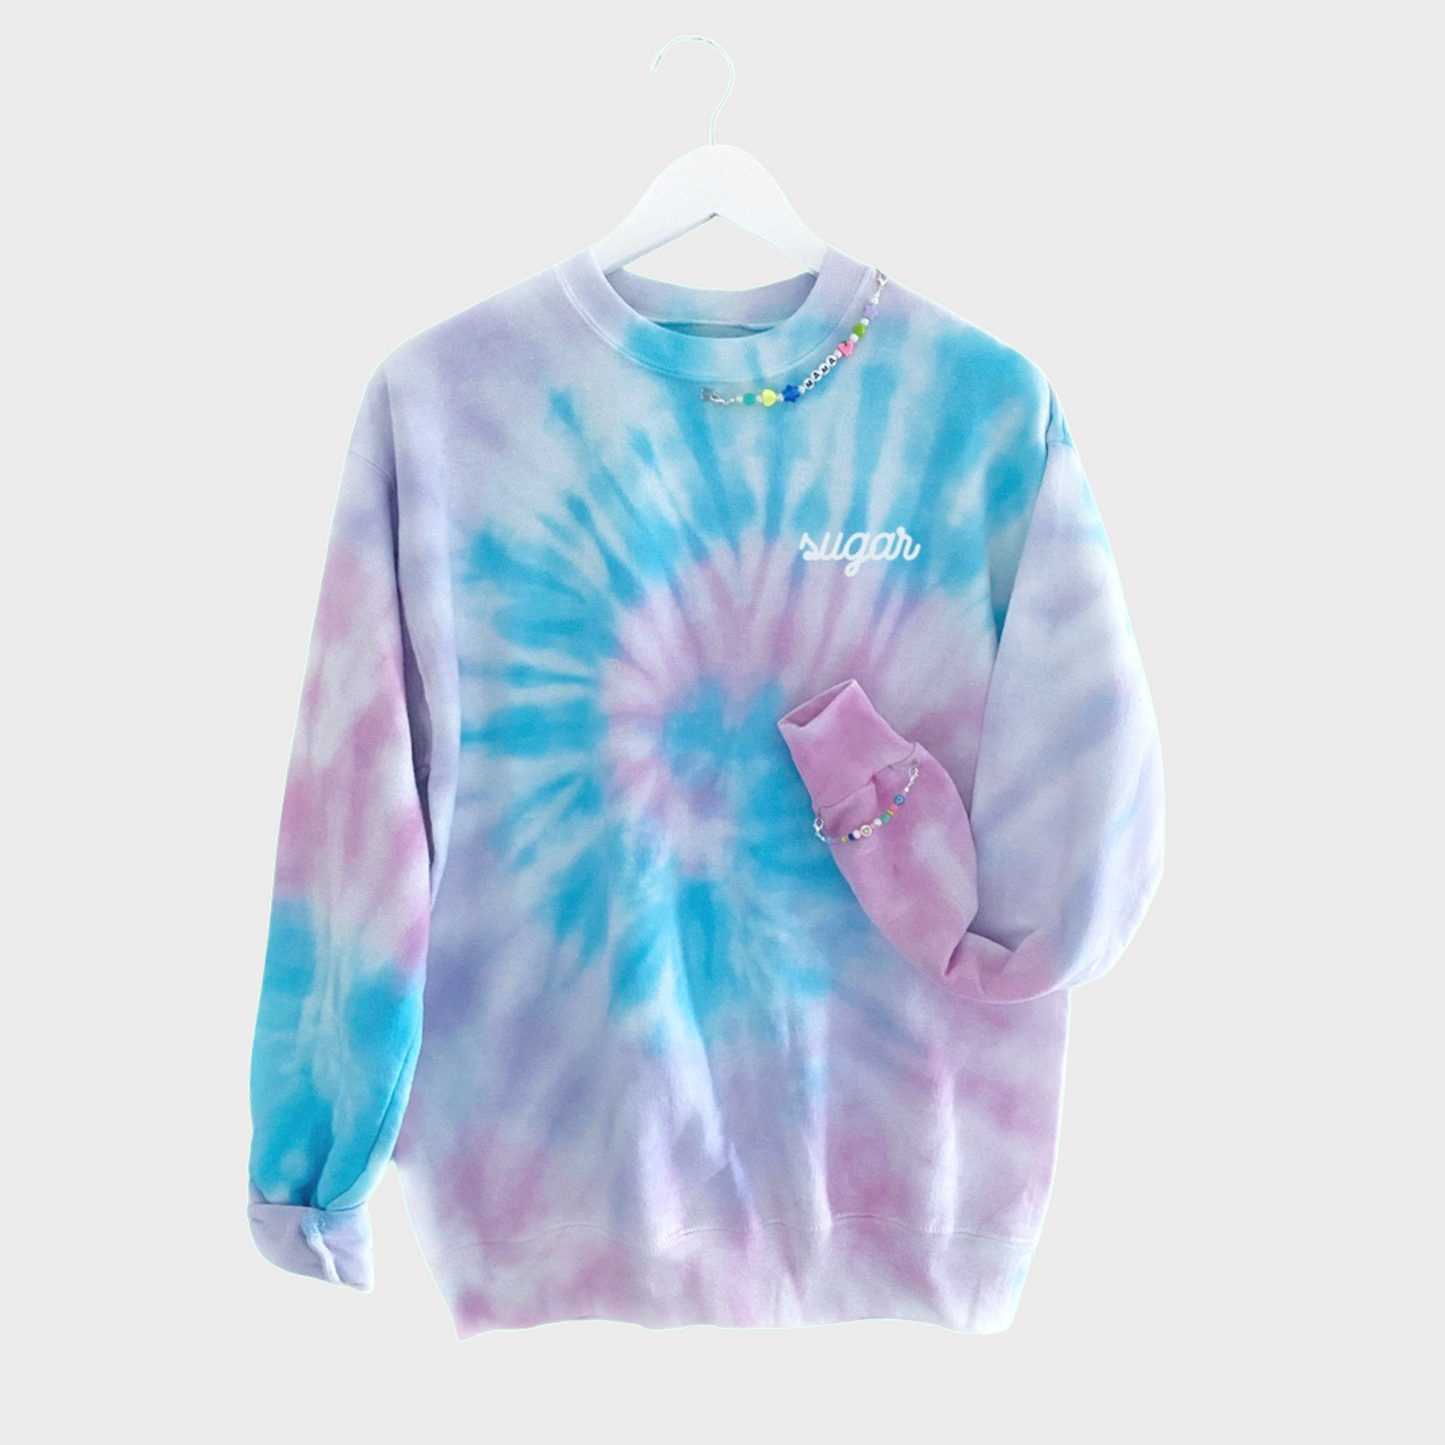 Load image into Gallery viewer, THE SWEATSHIRT ♡ Aura Sugar Co. tie-dye sweatshirt with two beaded details
